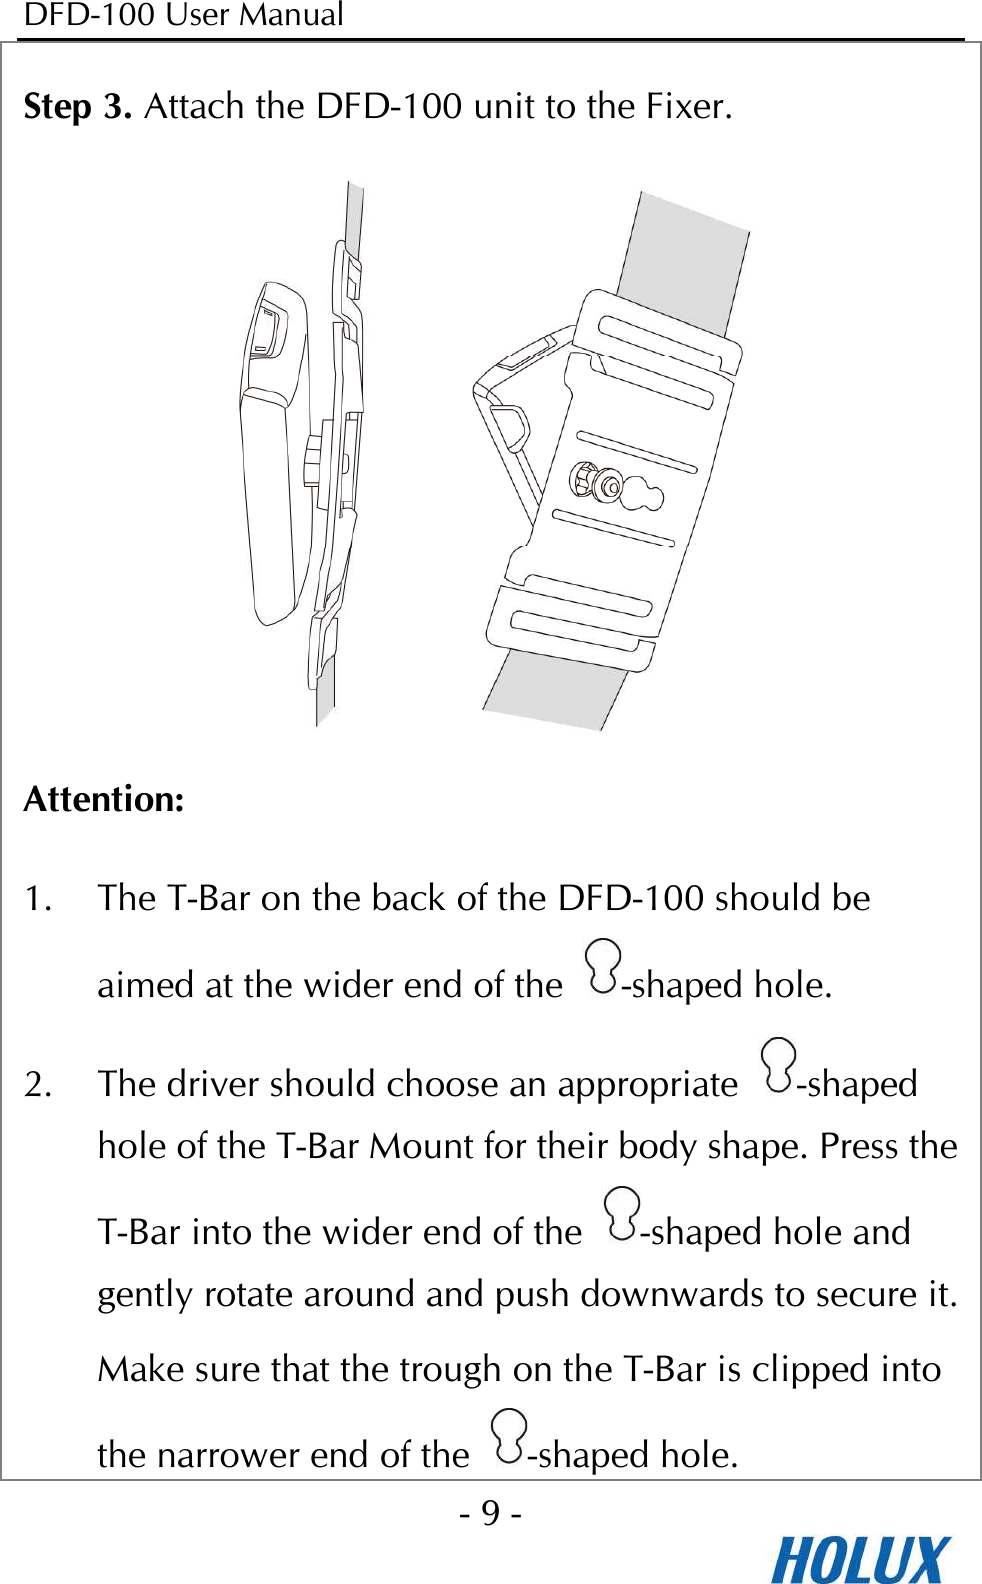 DFD-100 User Manual - 9 -  Step 3. Attach the DFD-100 unit to the Fixer.  Attention: 1. The T-Bar on the back of the DFD-100 should be aimed at the wider end of the  -shaped hole.   2. The driver should choose an appropriate  -shaped hole of the T-Bar Mount for their body shape. Press the T-Bar into the wider end of the  -shaped hole and gently rotate around and push downwards to secure it. Make sure that the trough on the T-Bar is clipped into the narrower end of the  -shaped hole. 